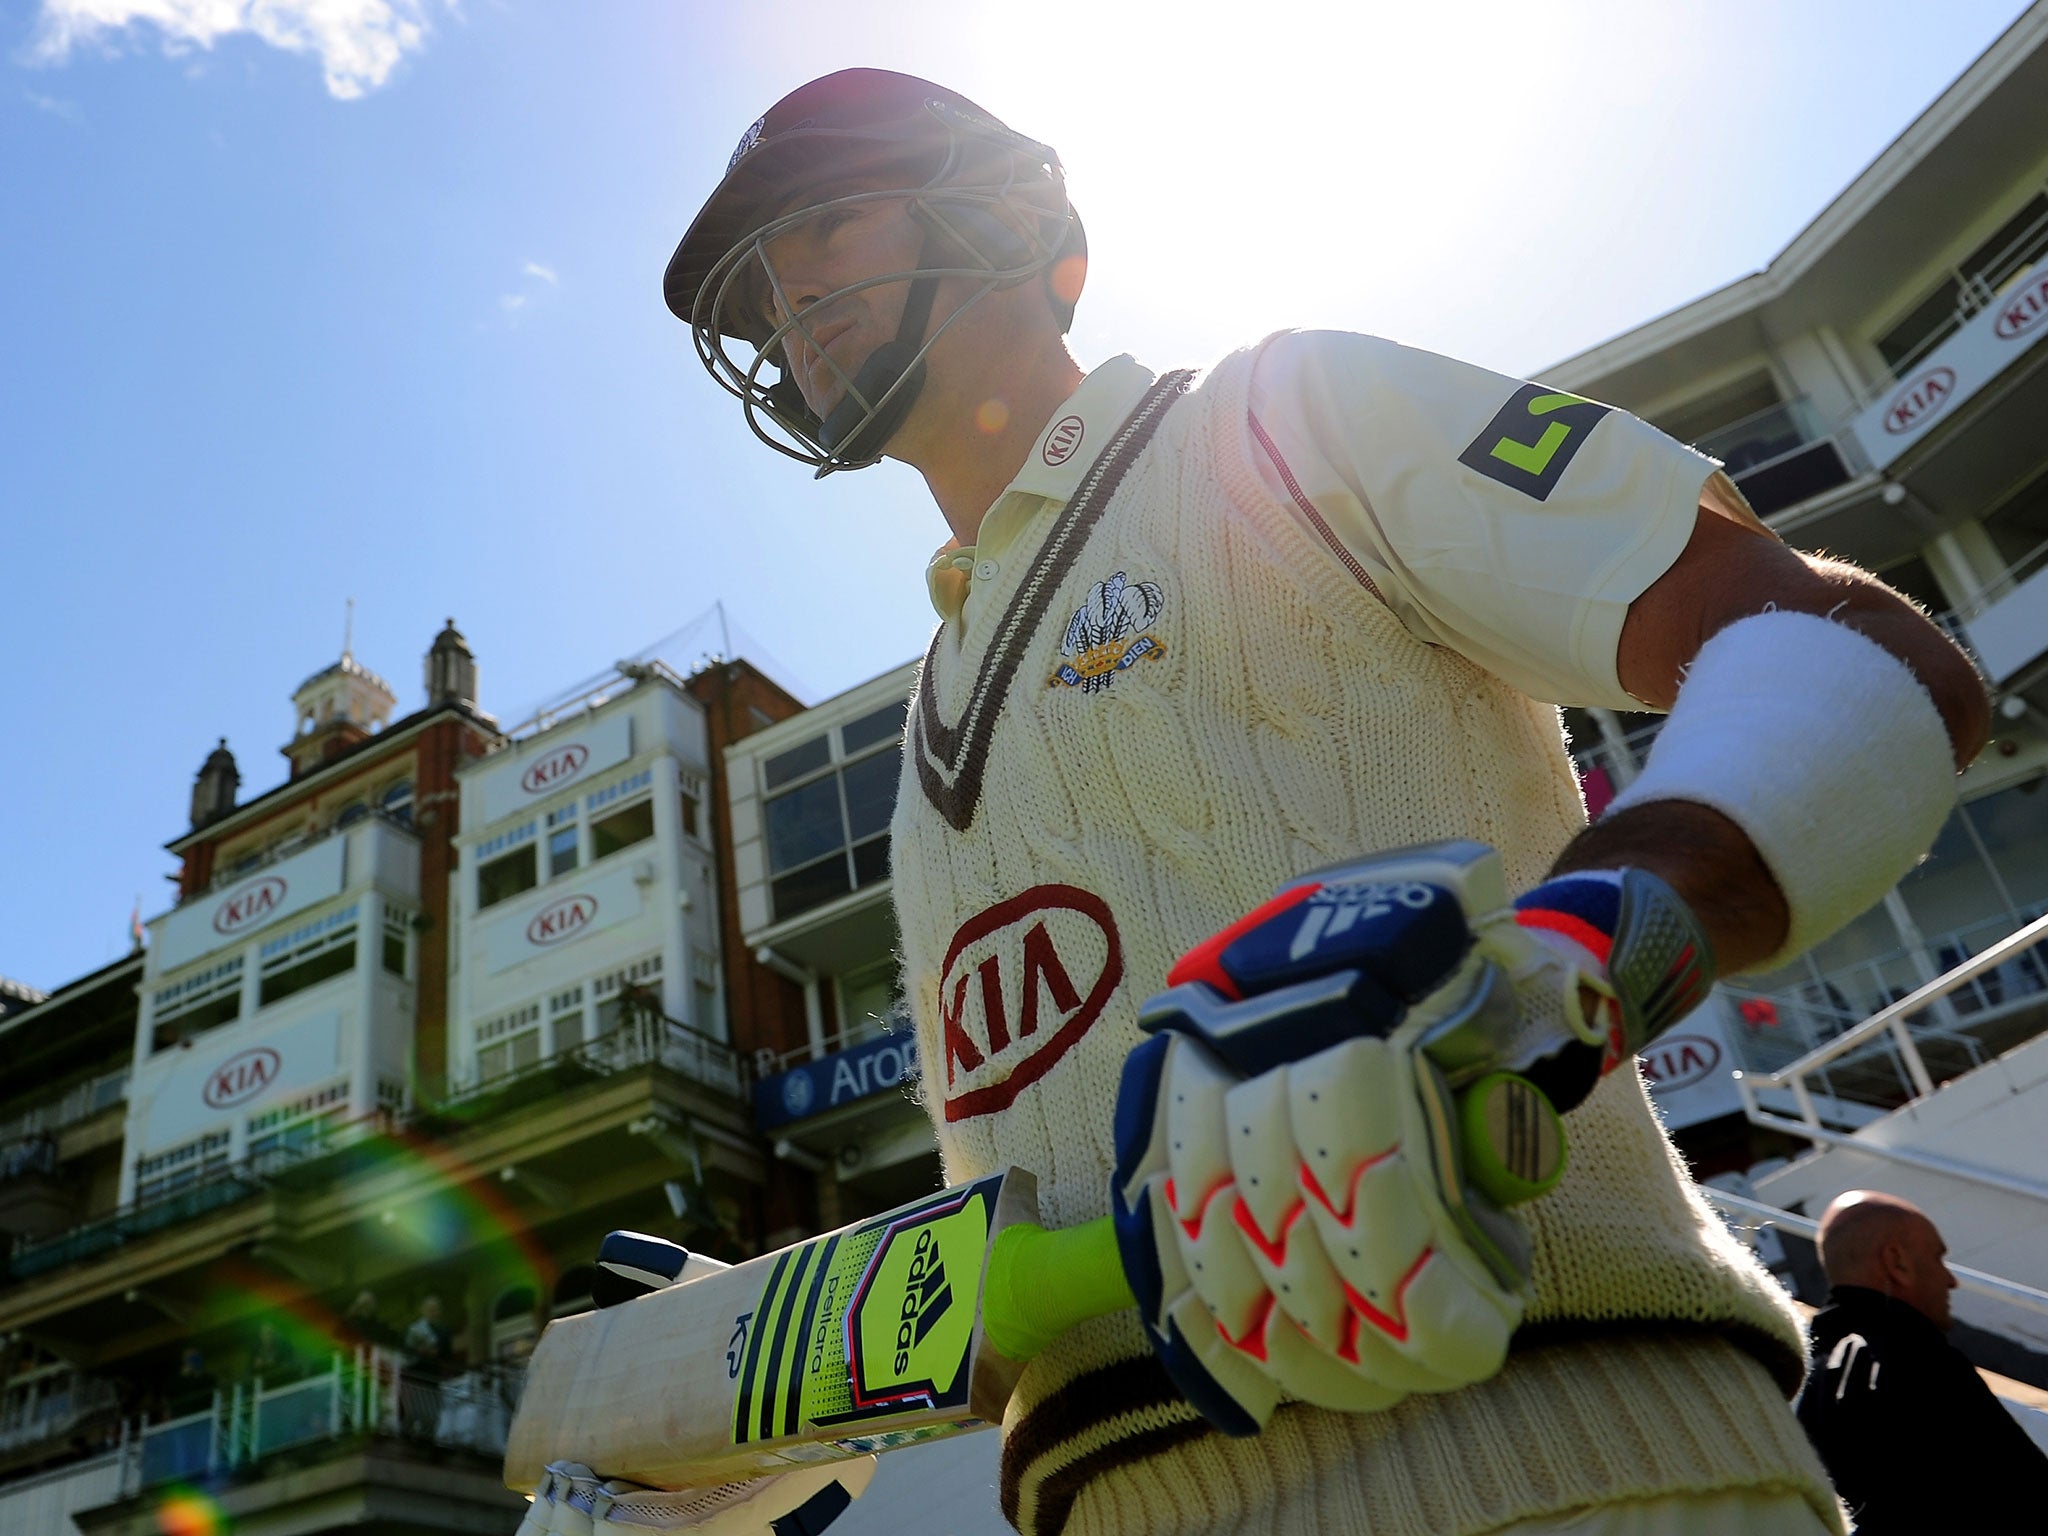 Kevin Pietersen makes his way out for Surrey during the match against Leicestershire